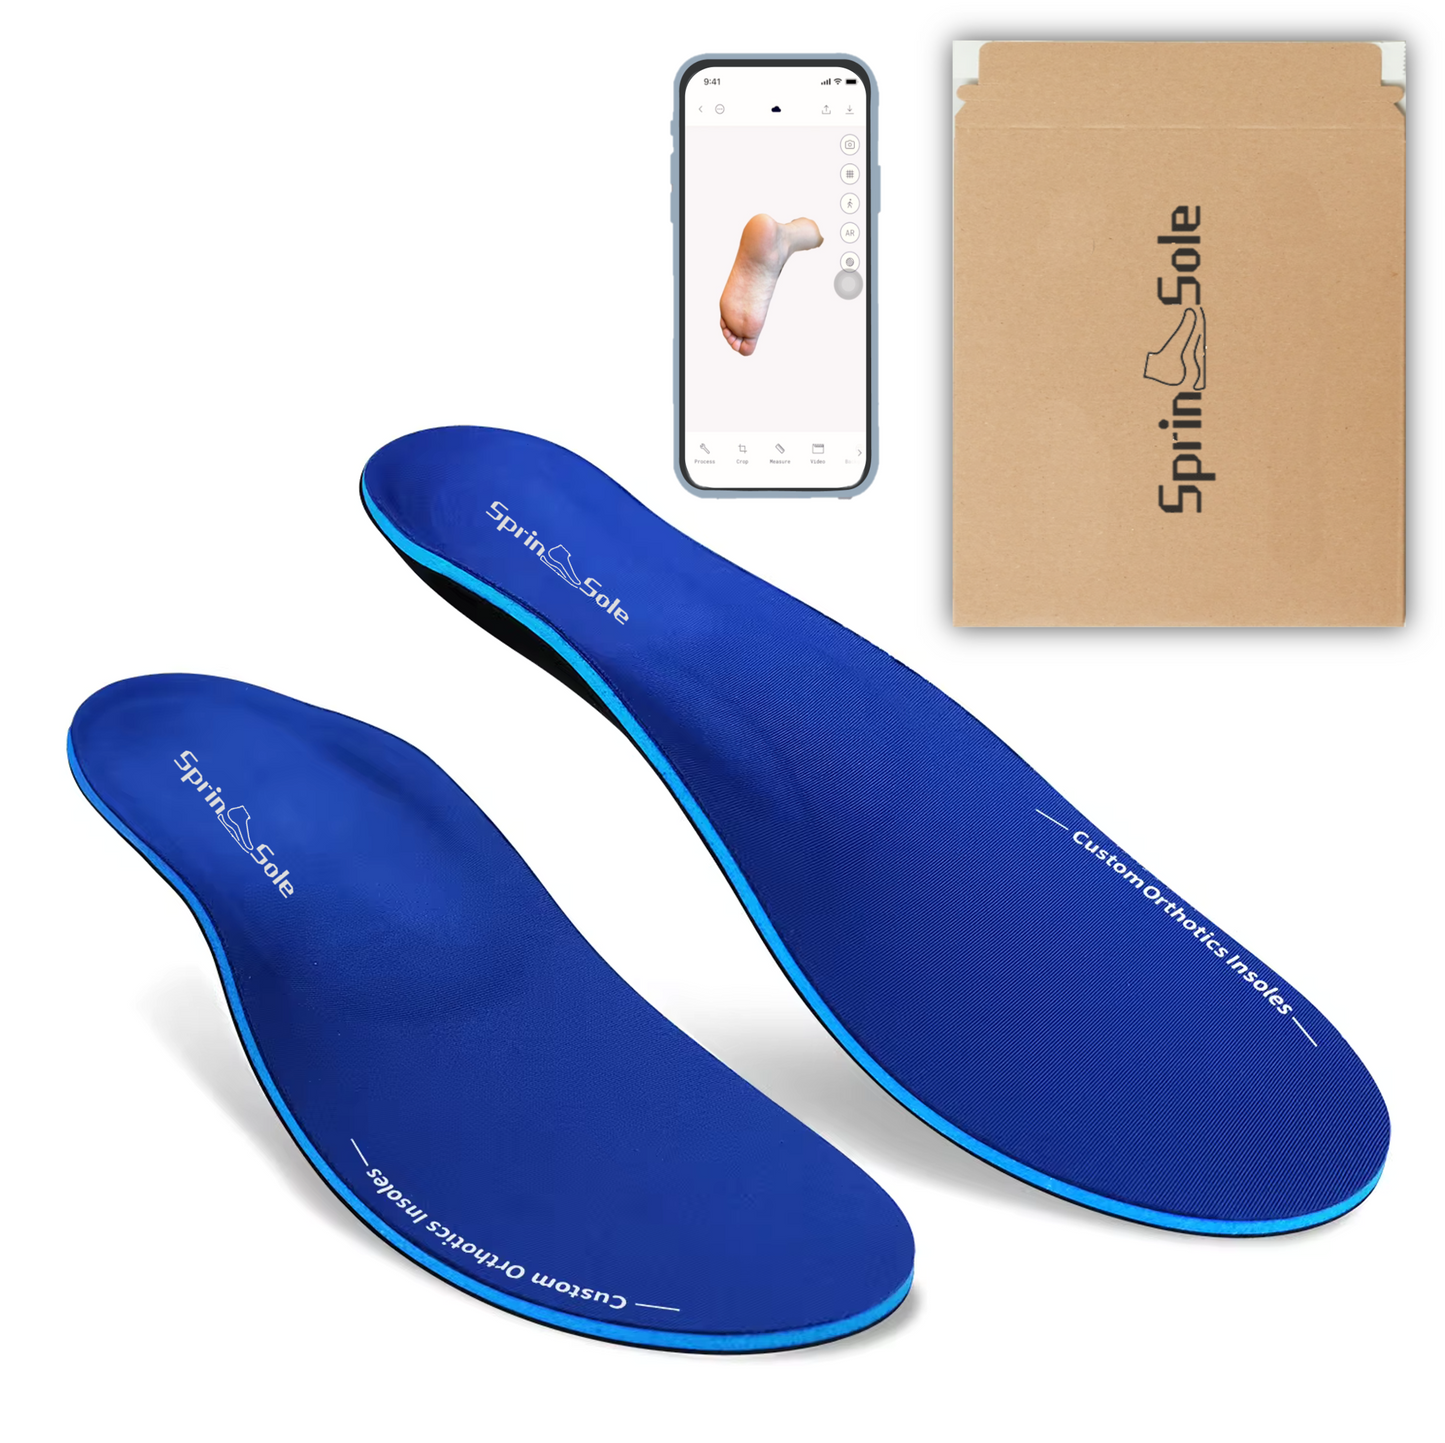 SprinSole custom orthotics full front view and phone scan